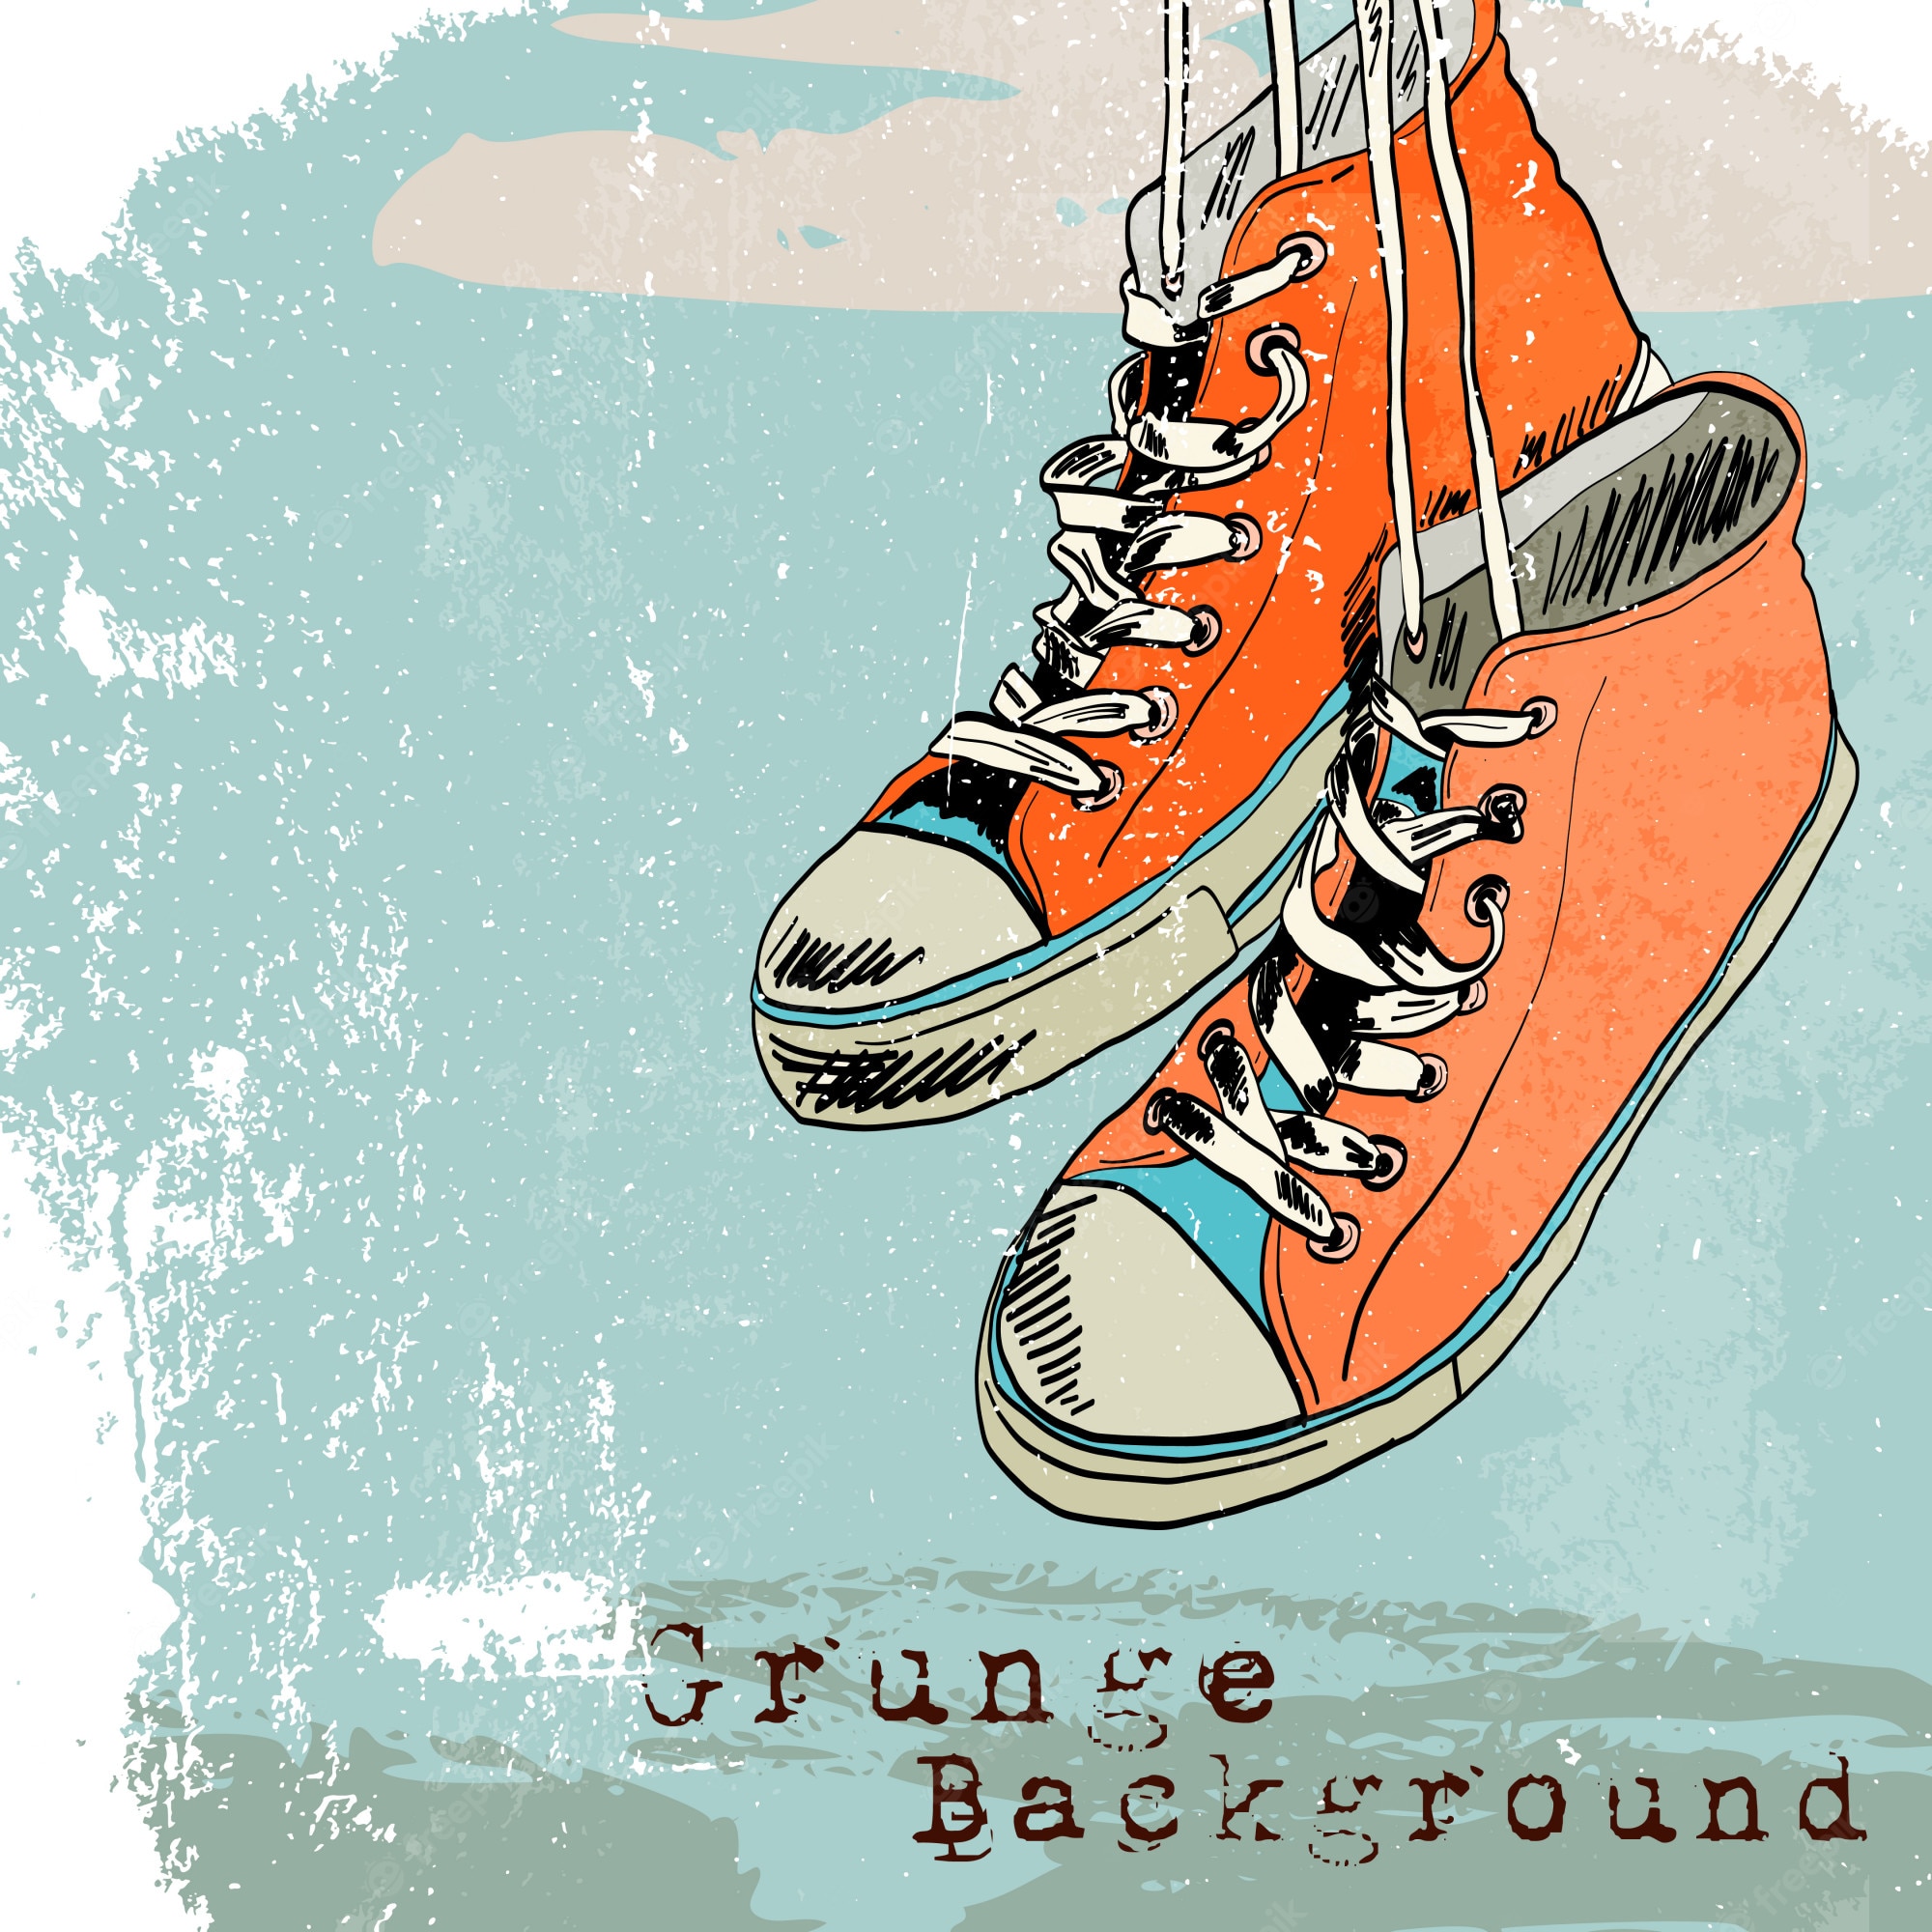 Shoes background Vectors & Illustrations for Free Download